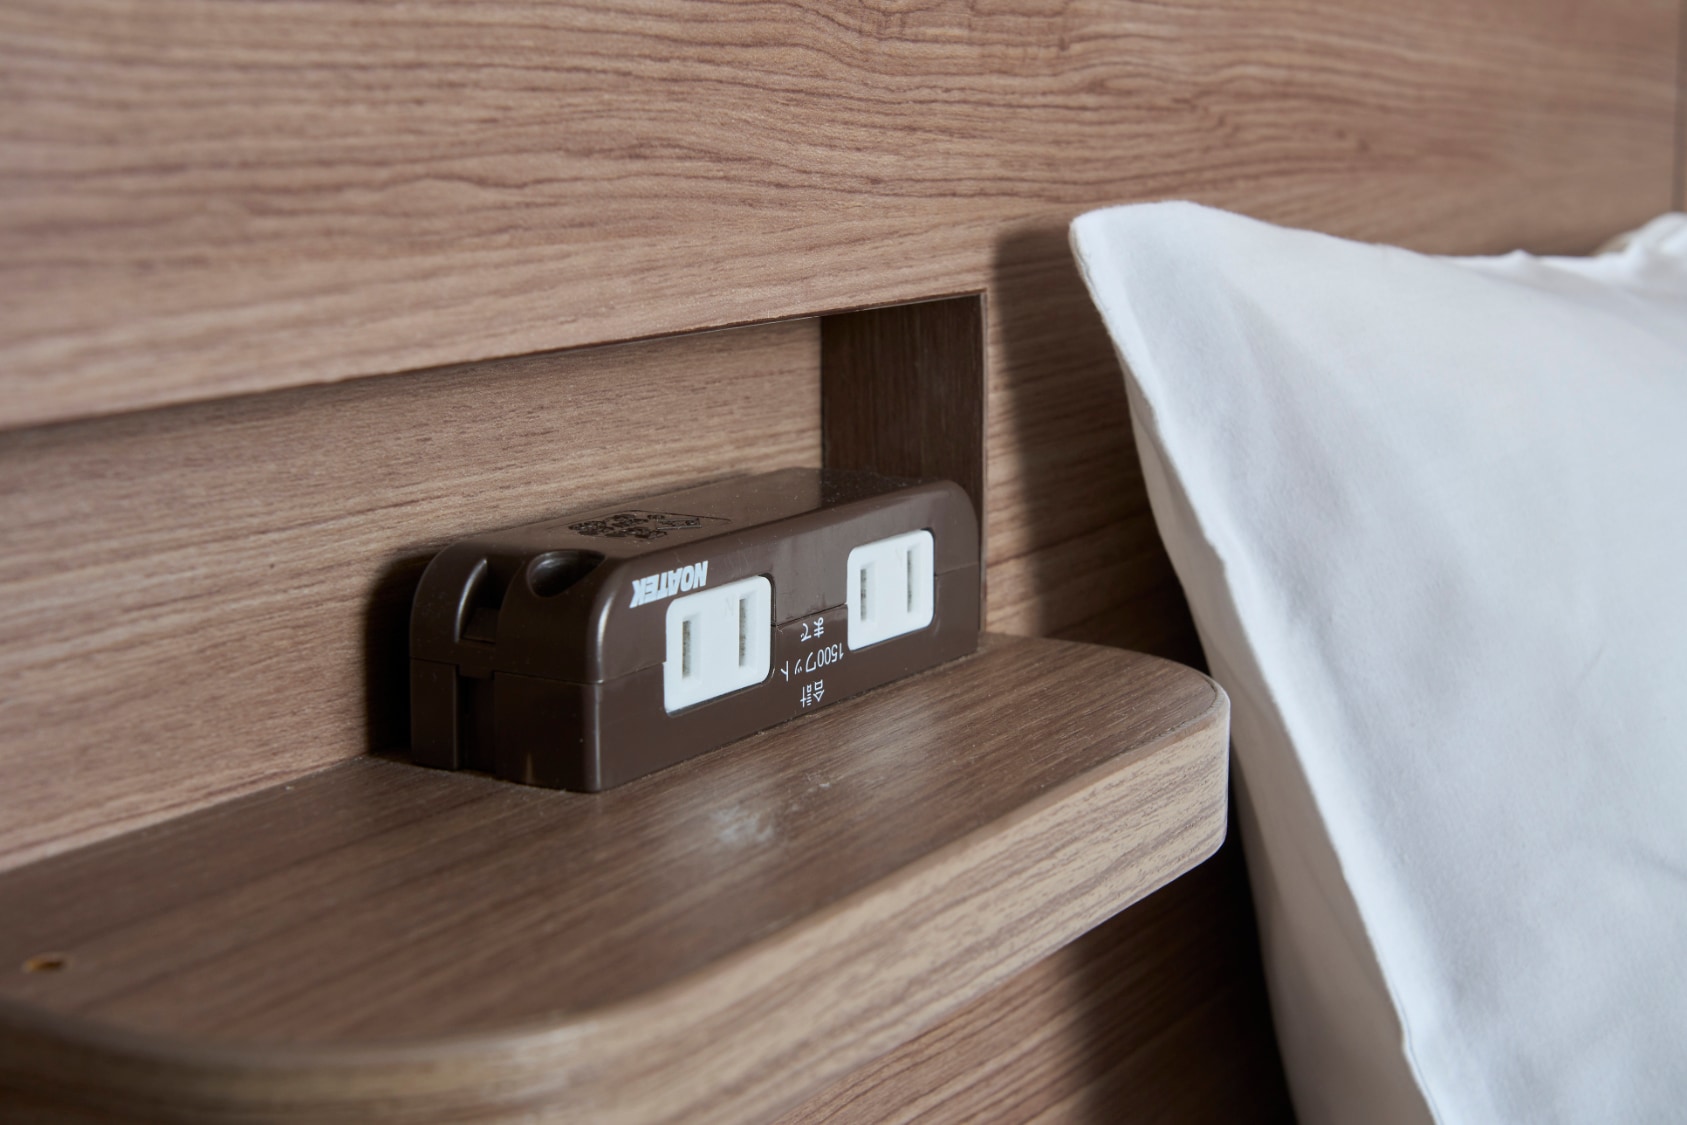 Since there is a power supply at the bedside, it is convenient to charge your smartphone!